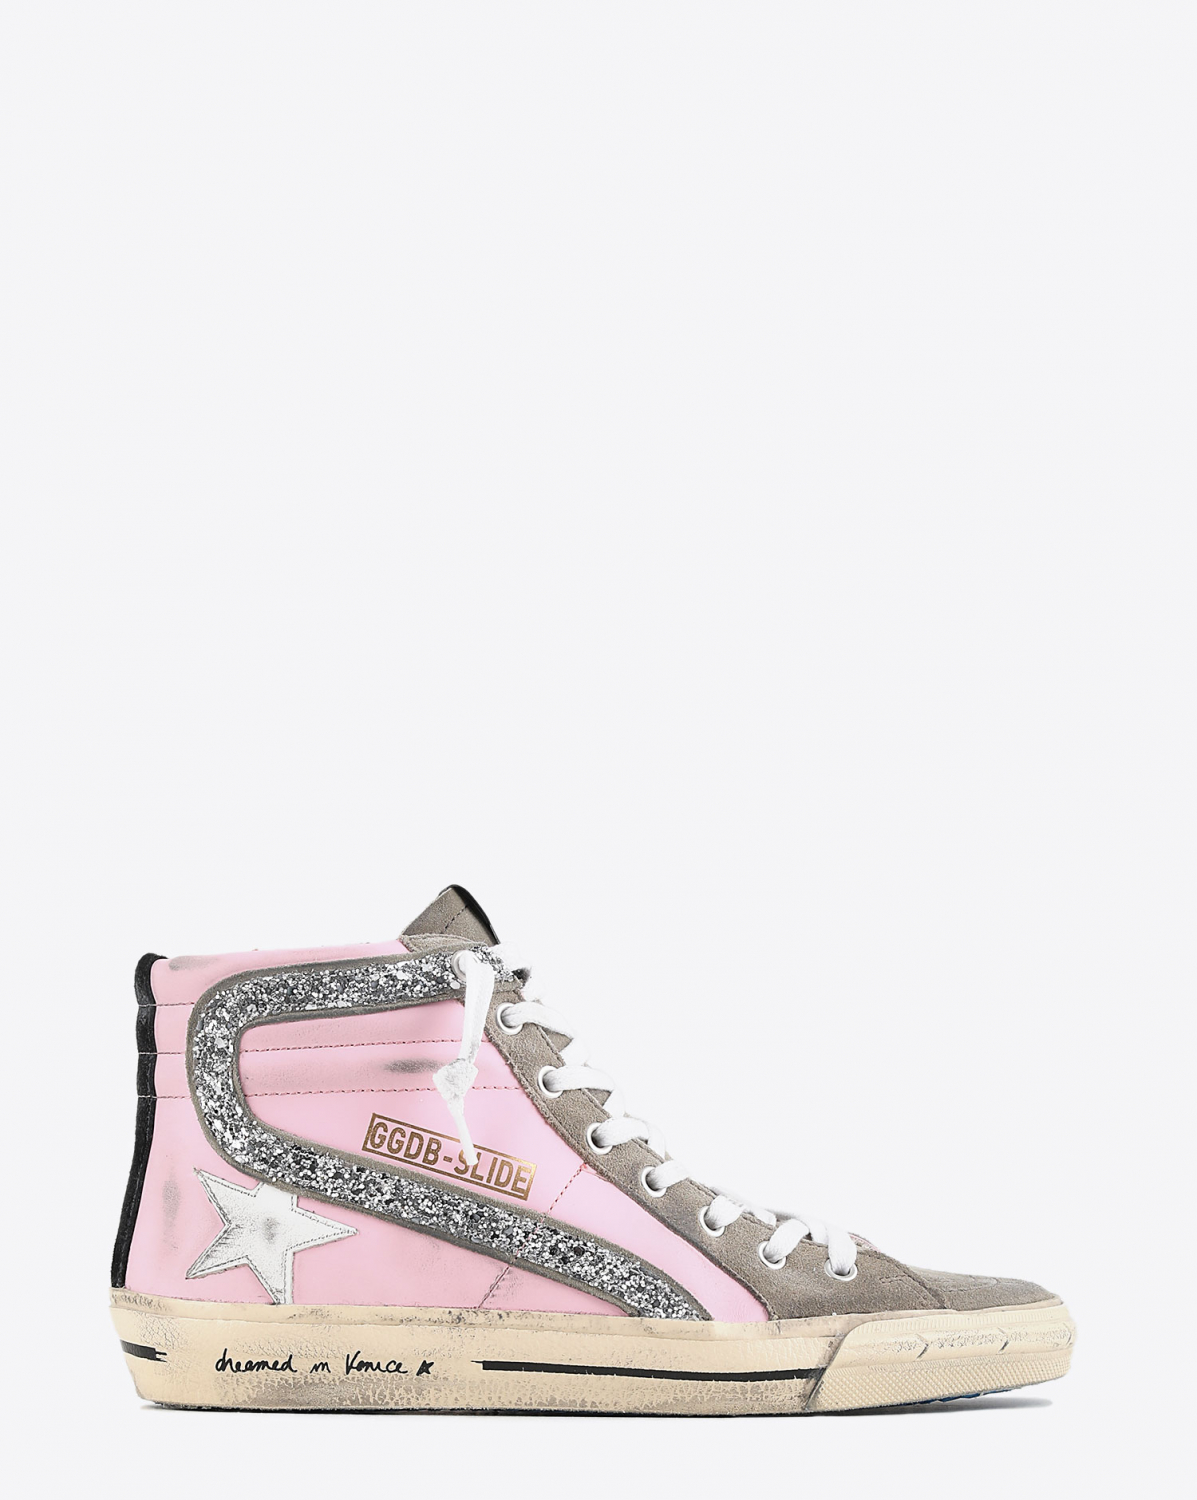 Sneakers Golden Goose Woman Collection Slide - Orchid Pink Taupe 81491